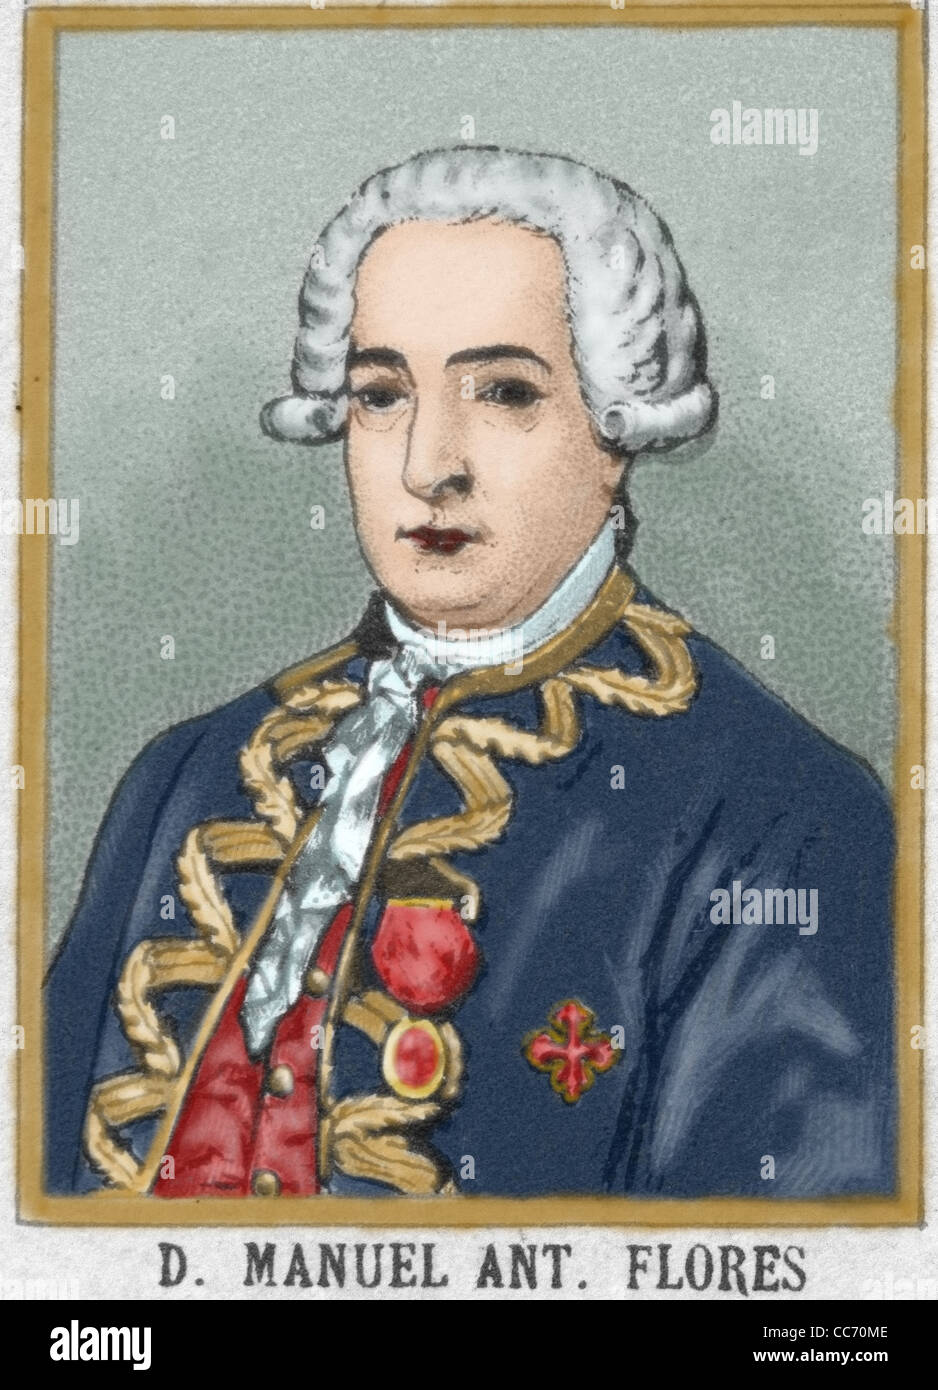 Manuel Antonio Flores (1722-1799). General in the Spanish navy and viceroy of New Granada and New Spain. Engraving. Stock Photo